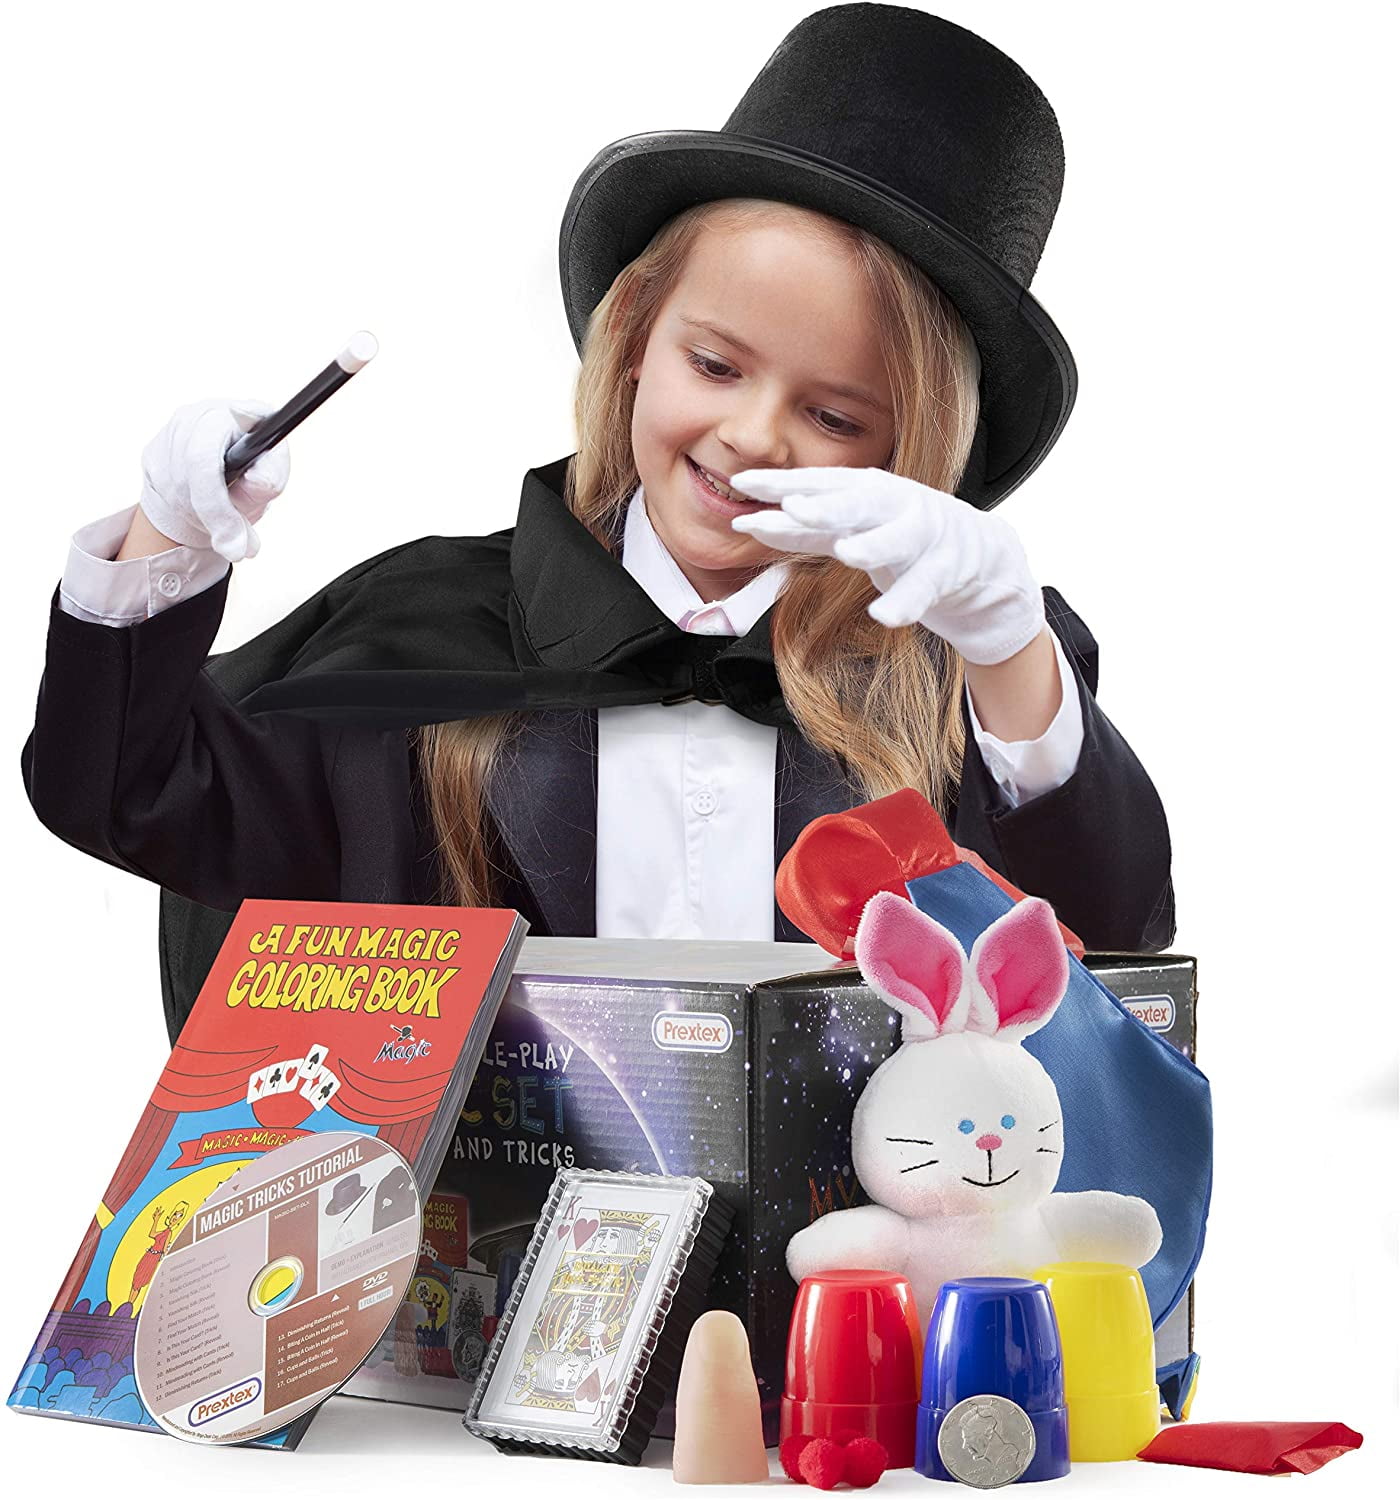 Prextex Kids Magic Set | Kiddie Magician Role Play Costume and Tricks Set for Kids - Pretend Play Dress Up Set with Exciting Magic Trick Props and 1 Full Hour Training Instruction DVD